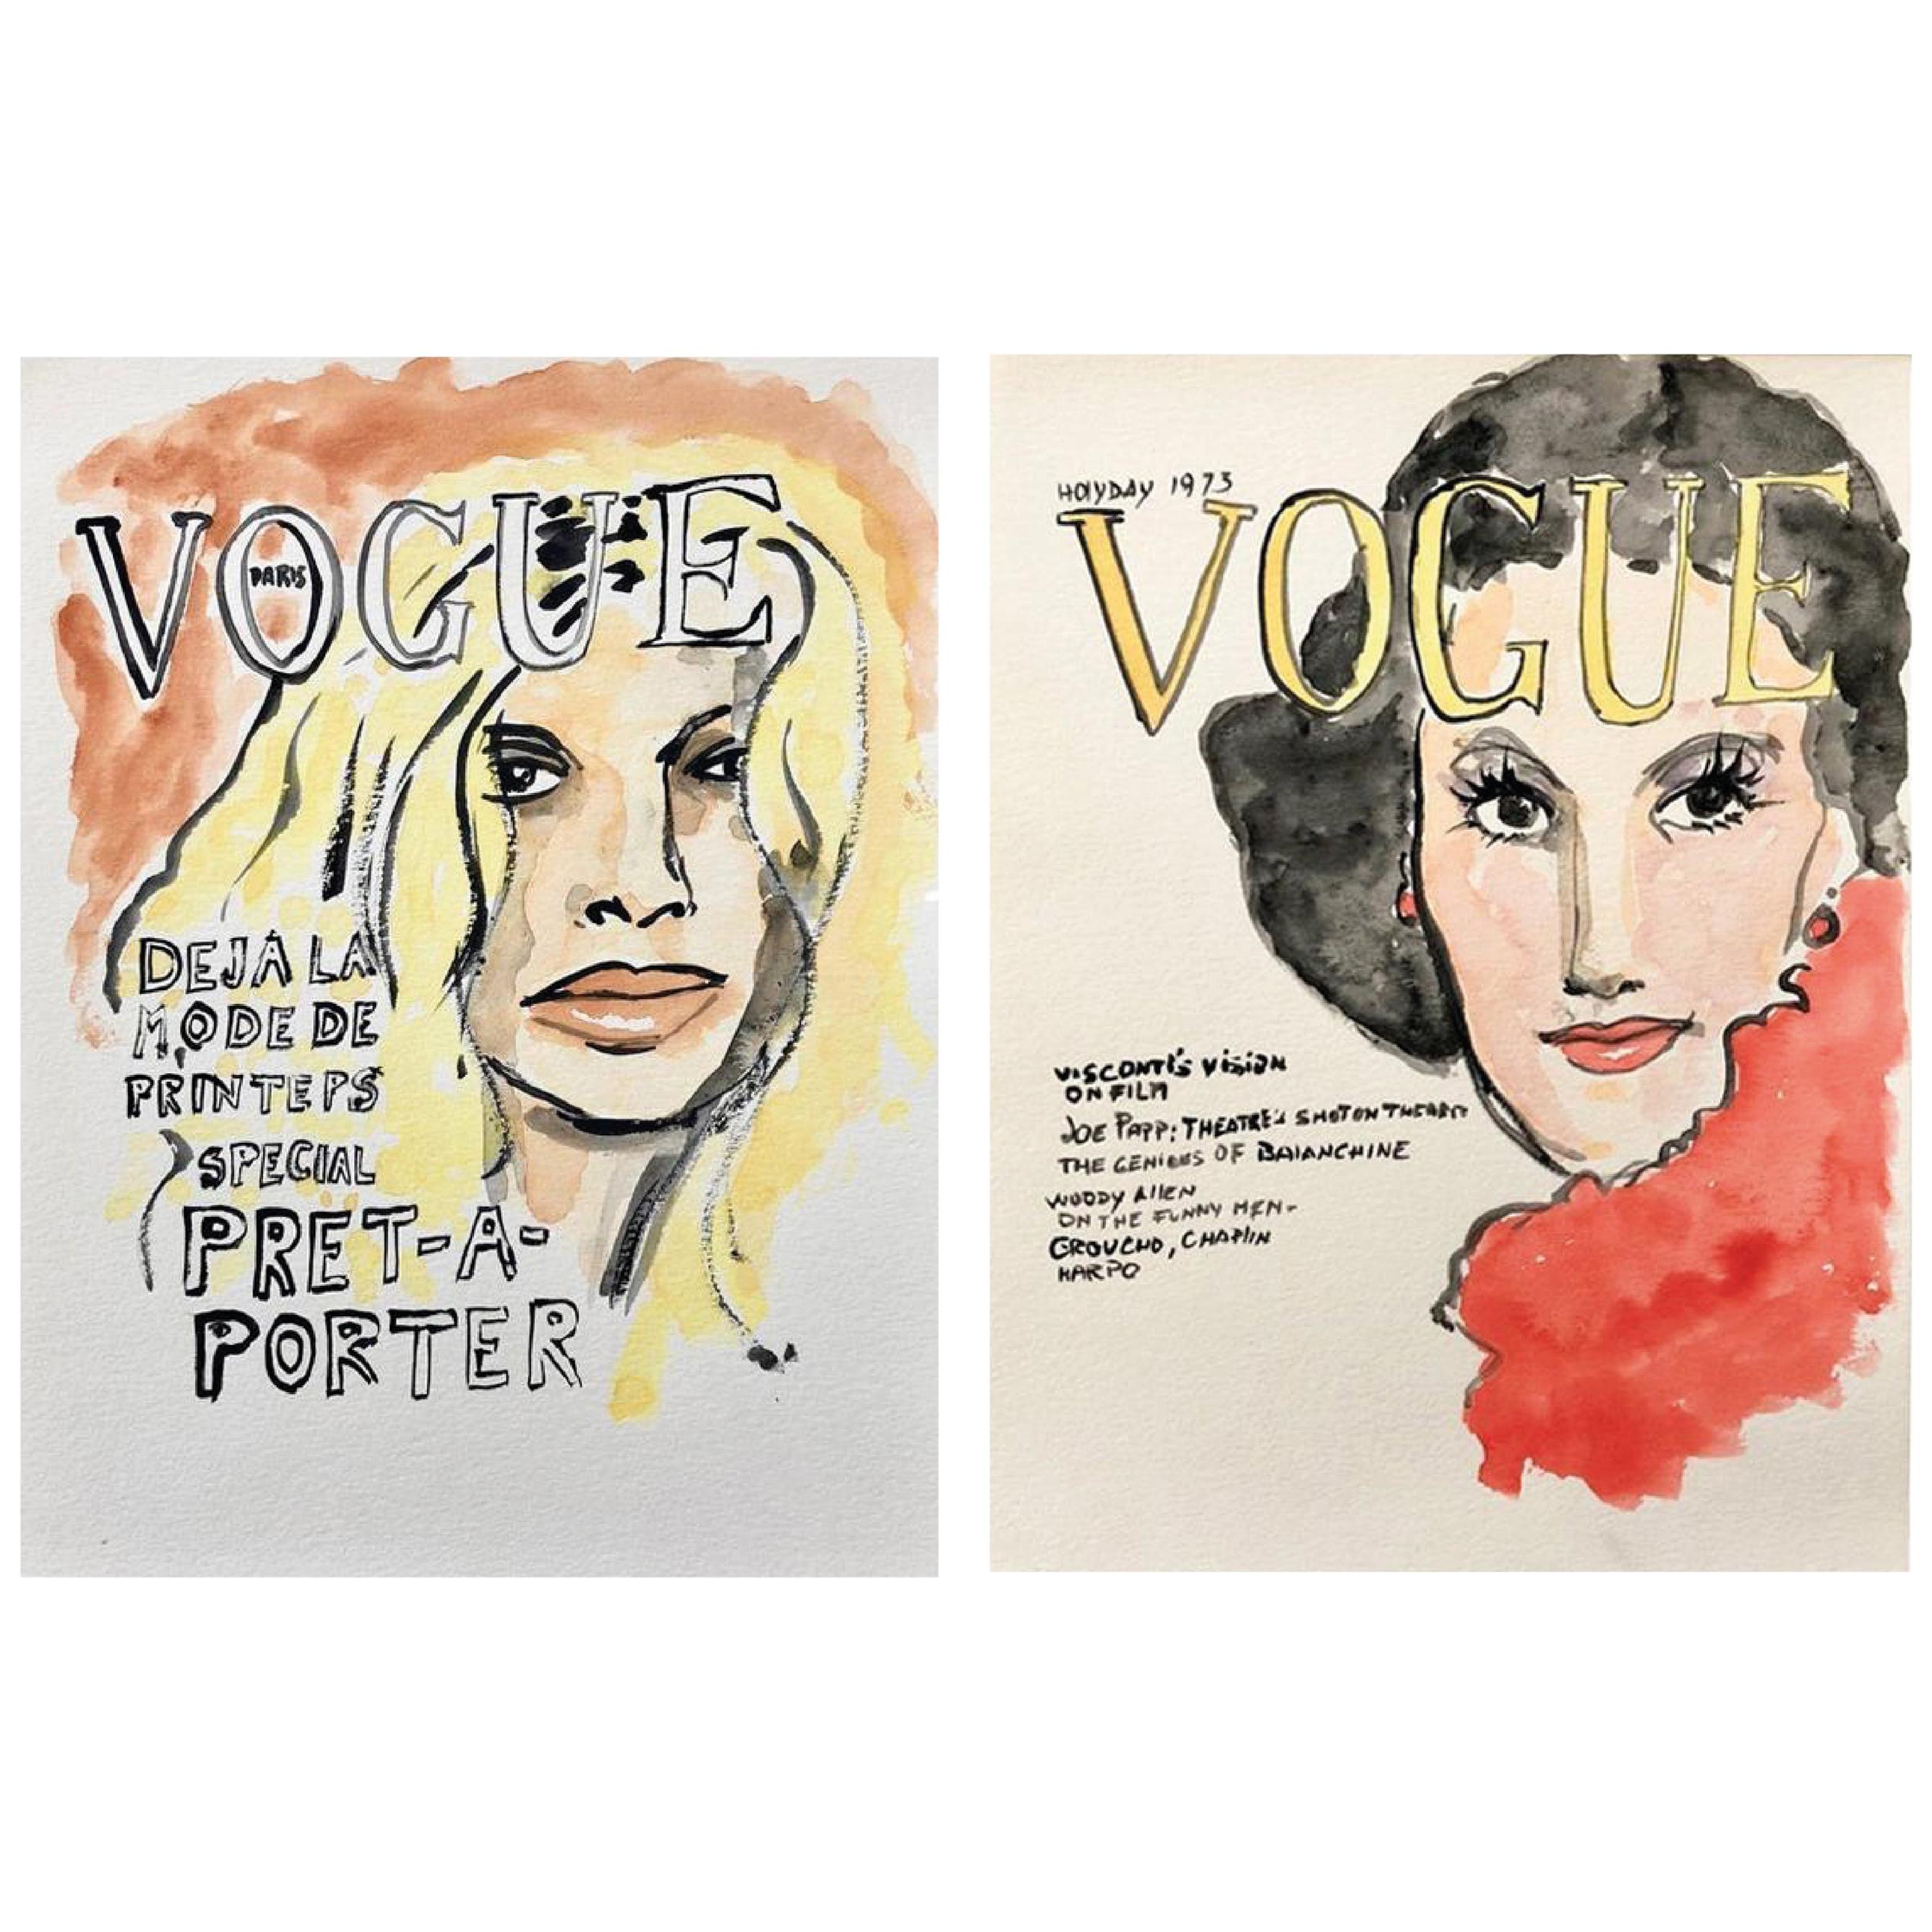 Vogue #1 and Vogue #2, Set of Two Watercolors on Archival Paper